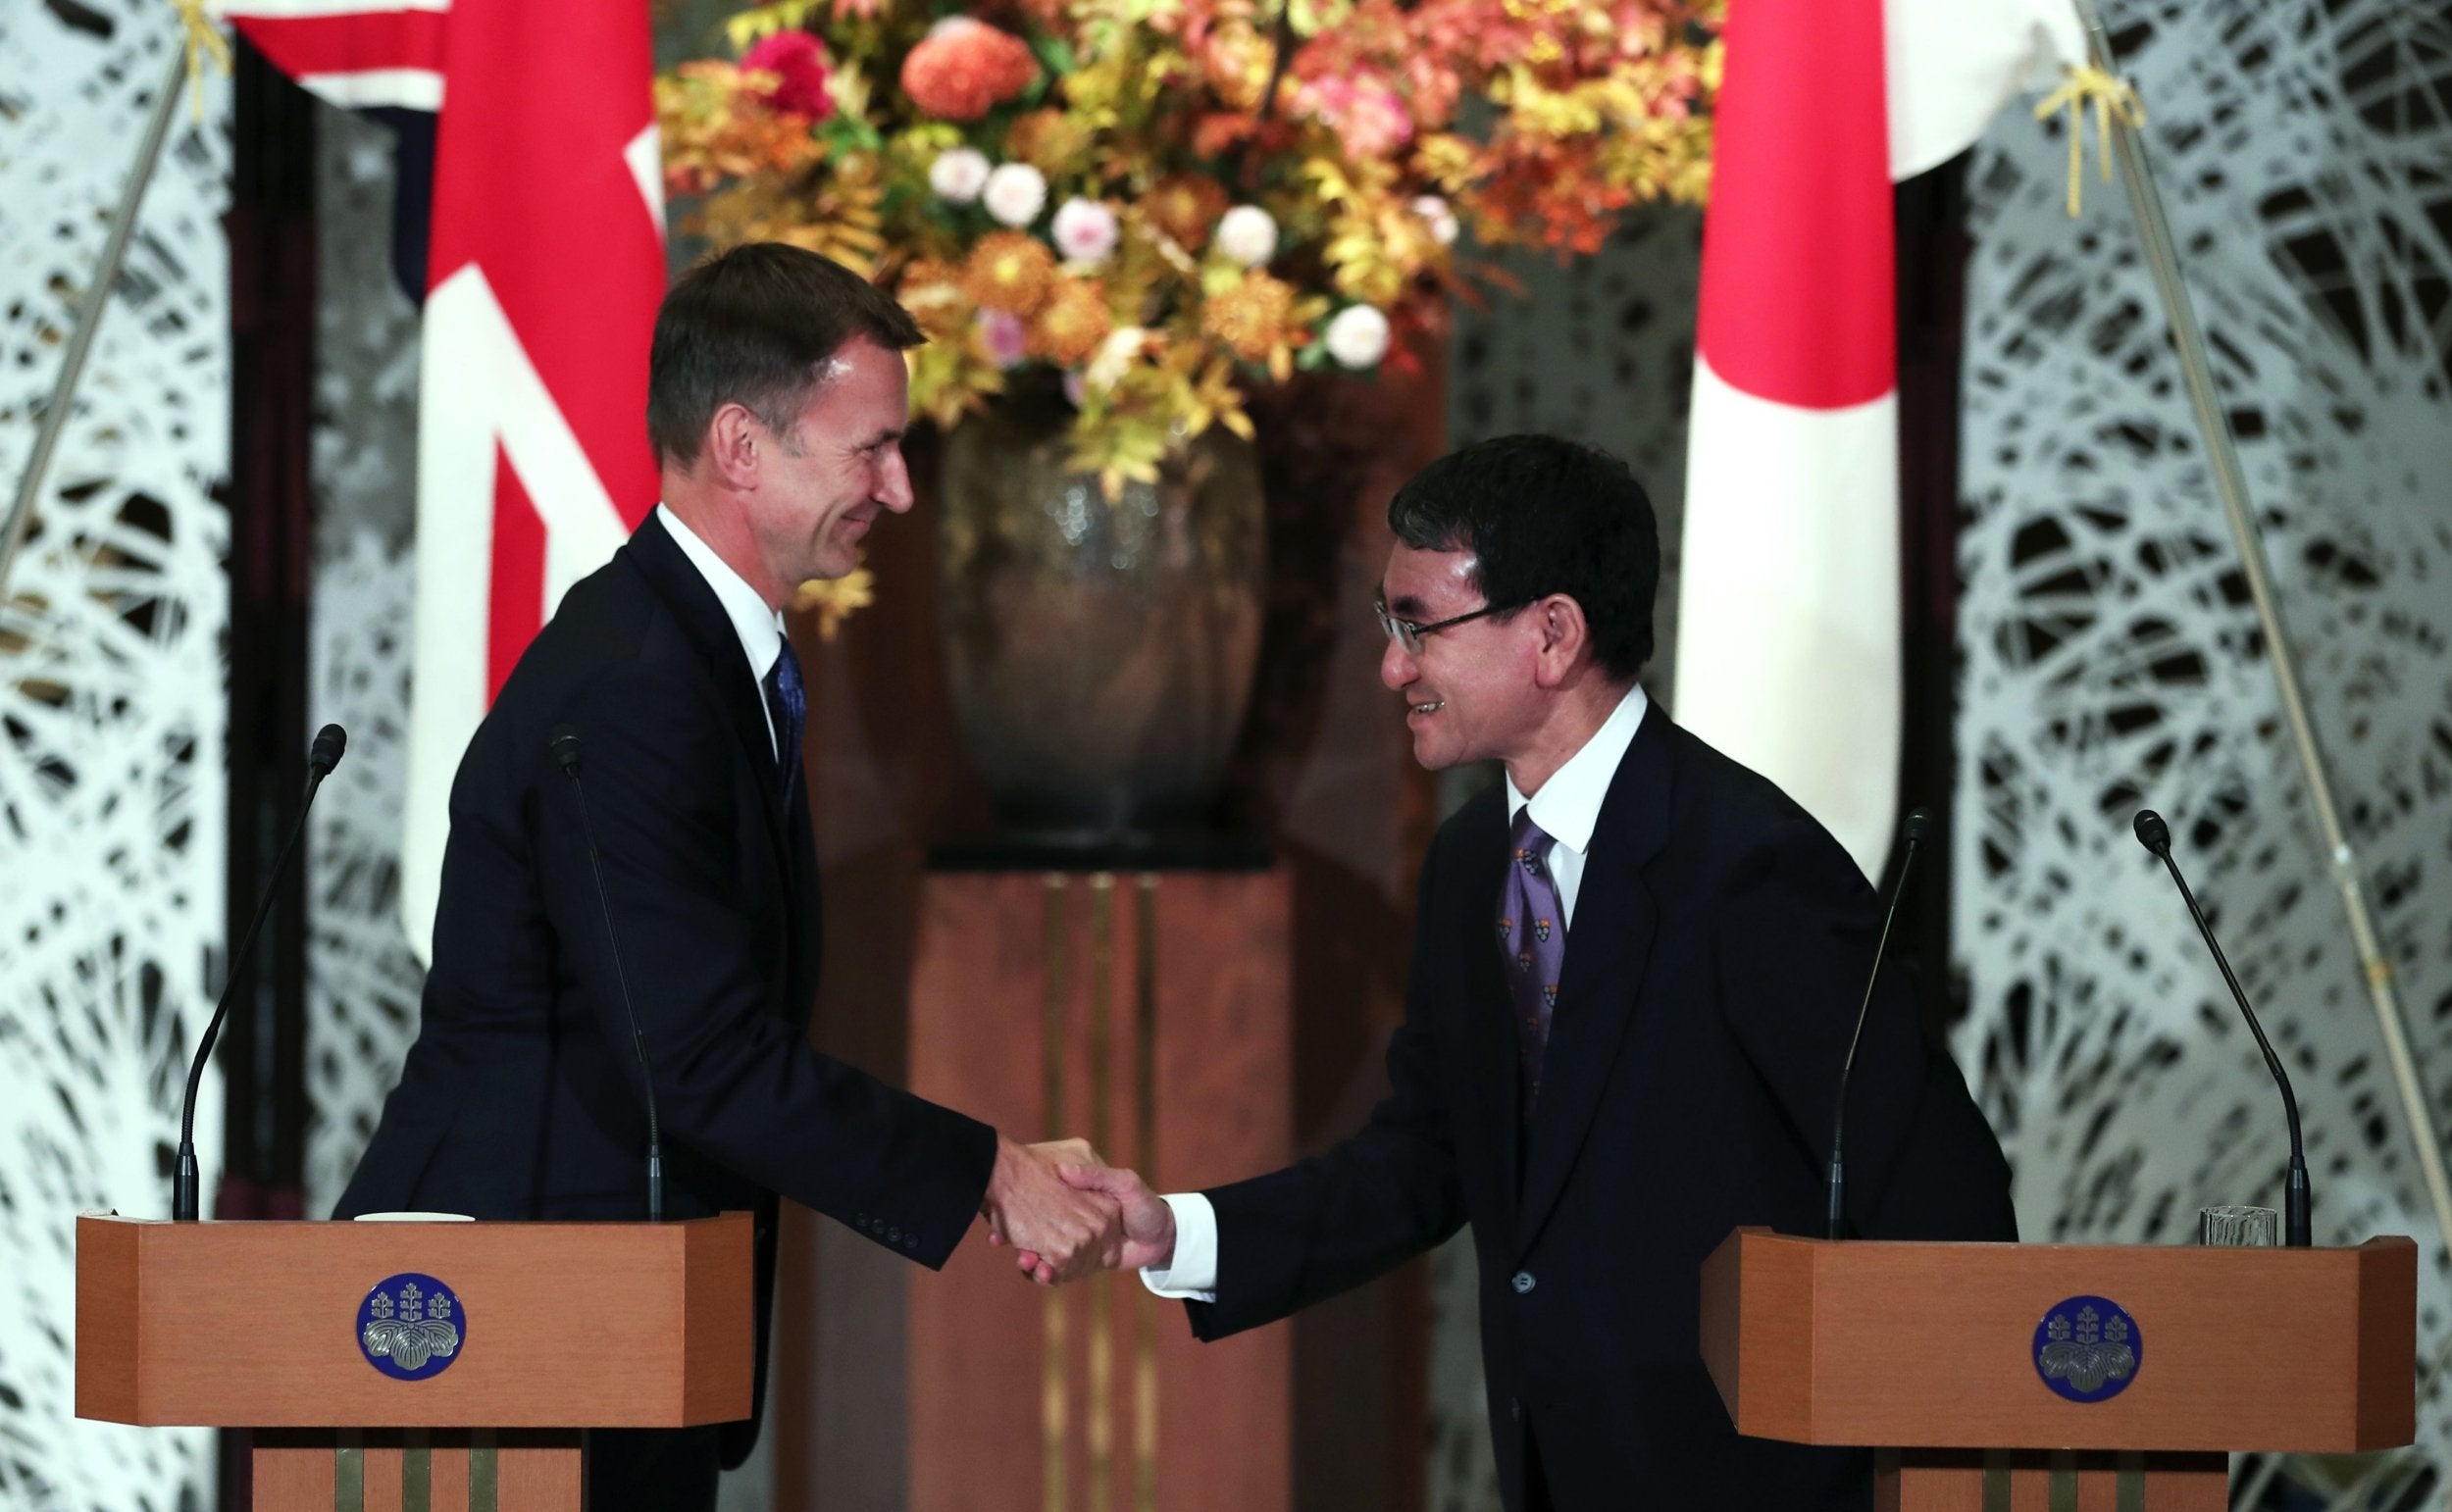 Jeremy Hunt has met with Japan’s foreign minister Taro Kono in the past, but even as Shinzo Abe says the UK can join TPP after Brexit, he still recognising that Brexit was a bad idea overall for the British economy